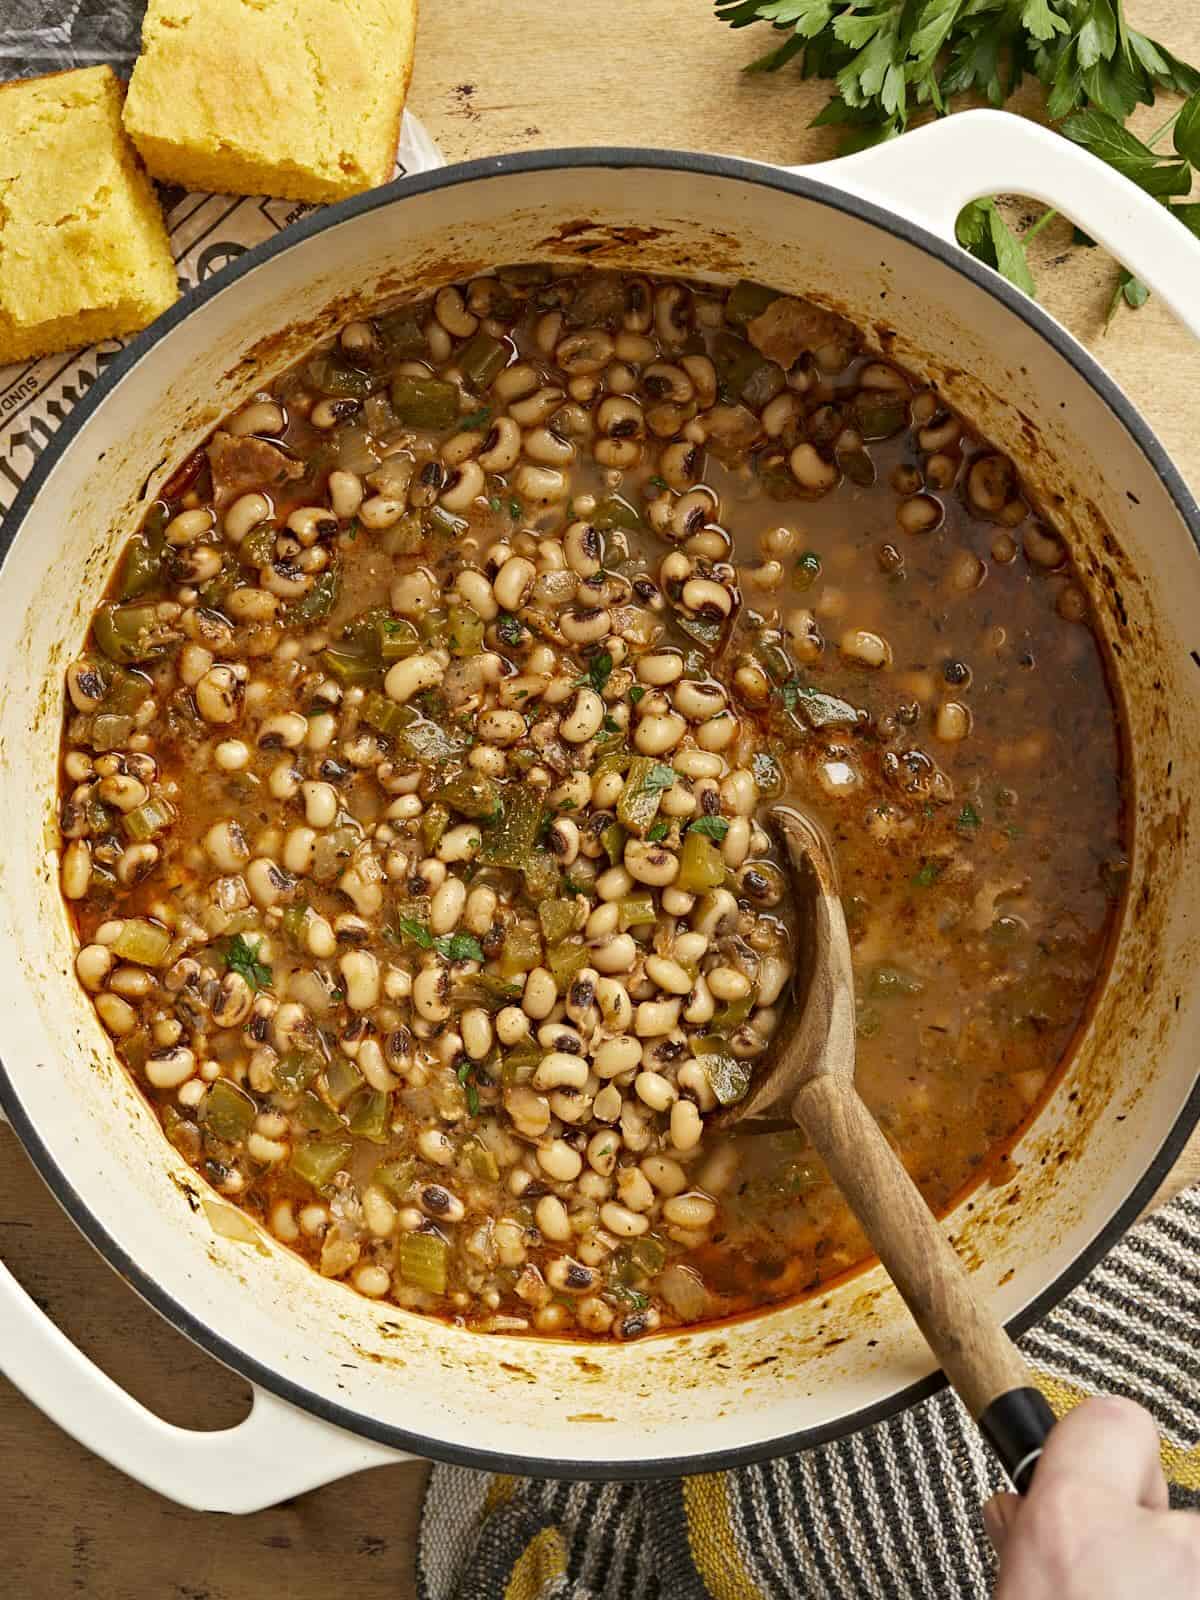 Overhead view of a pot of black-eyed peas being stirred with a wooden spoon.